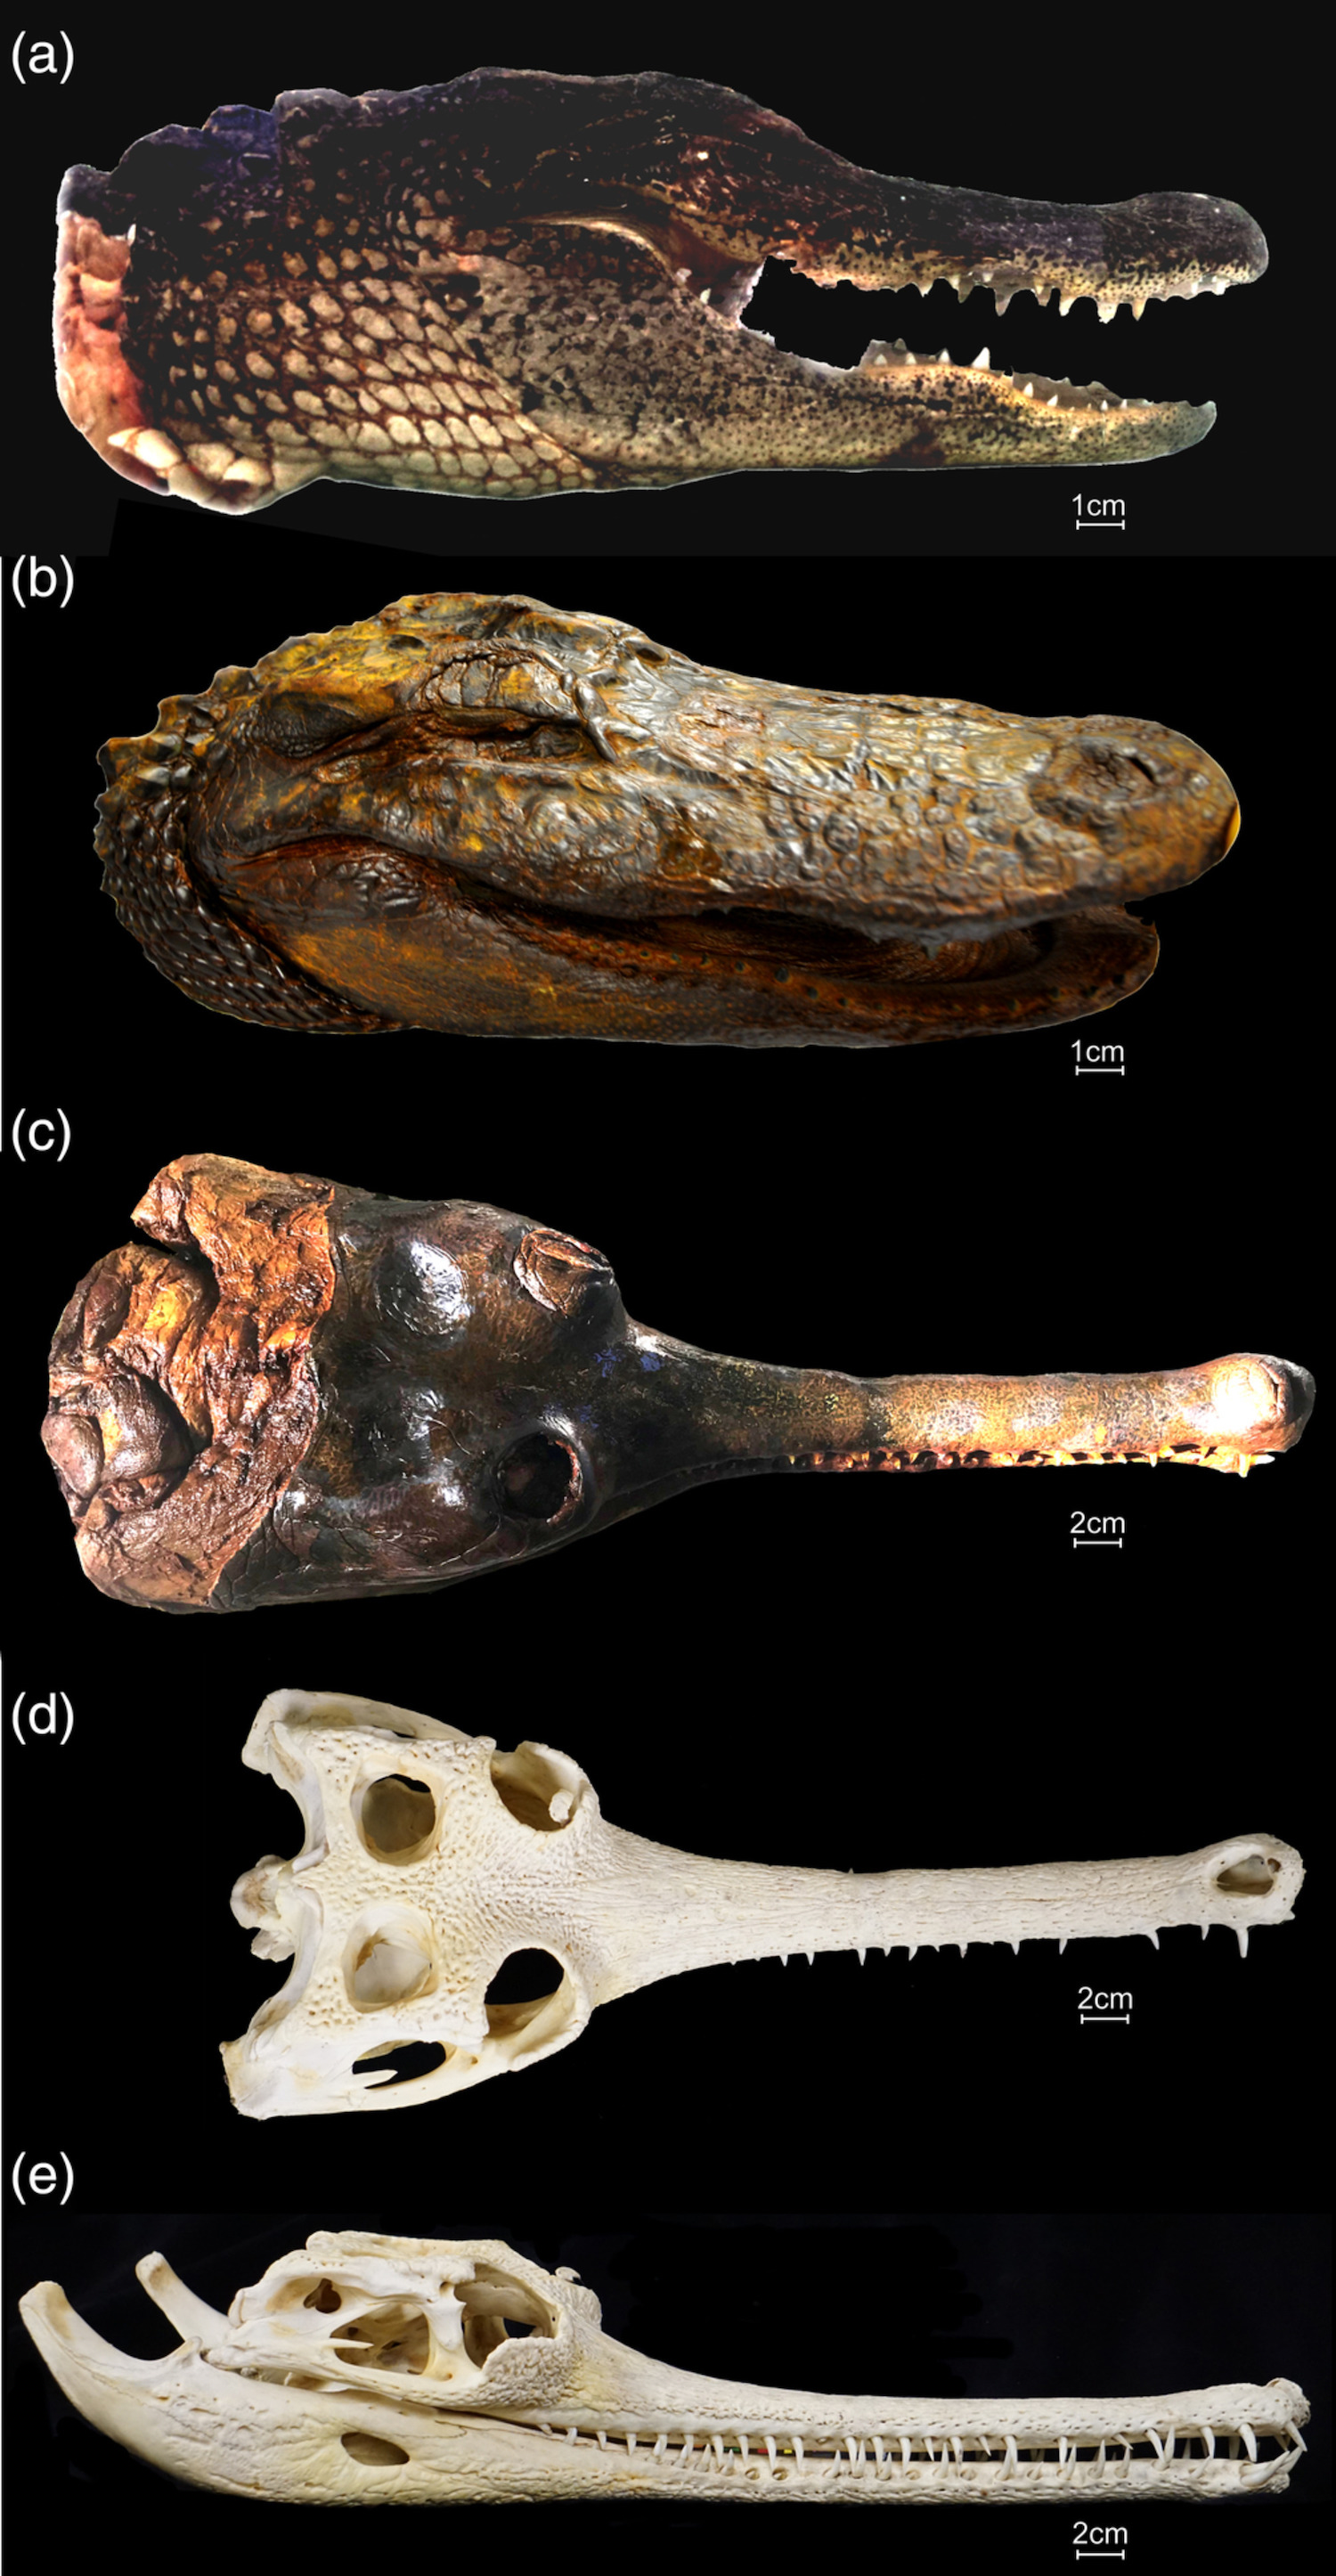 Large specimens of crocodilians during preparation before, during and after iodine contrast from The Anatomical Record paper titled "New frontiers in imaging, anatomy and mechanics of crocodylian jaw muscles," which included as authors PhD students from Casey Holliday's lab.